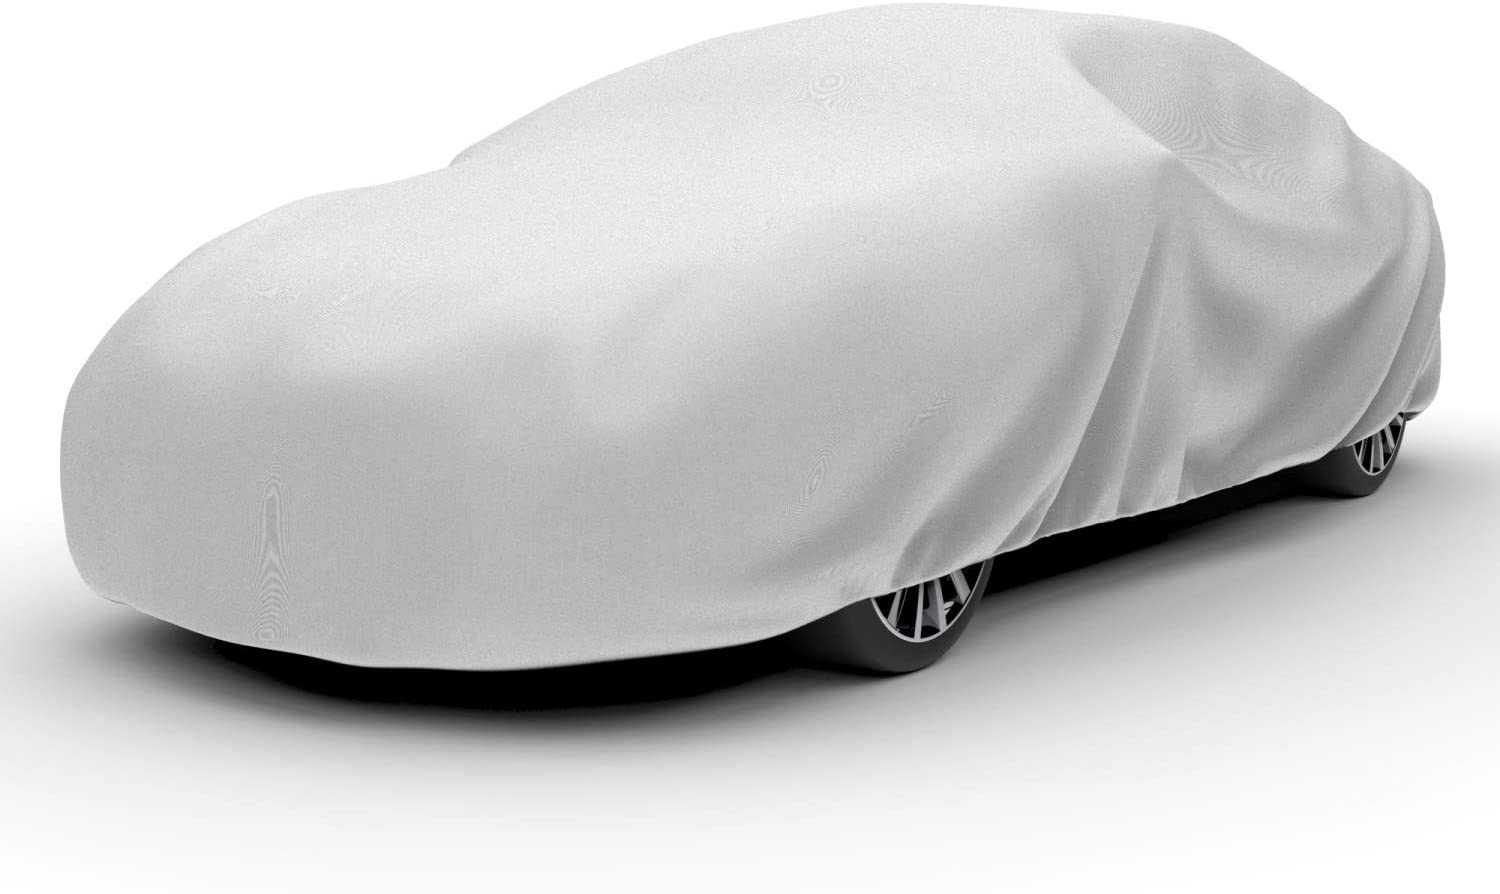 Budge RB-3 Rain Barrier Car Cover Gray Size 3: Fits up to 16' 8